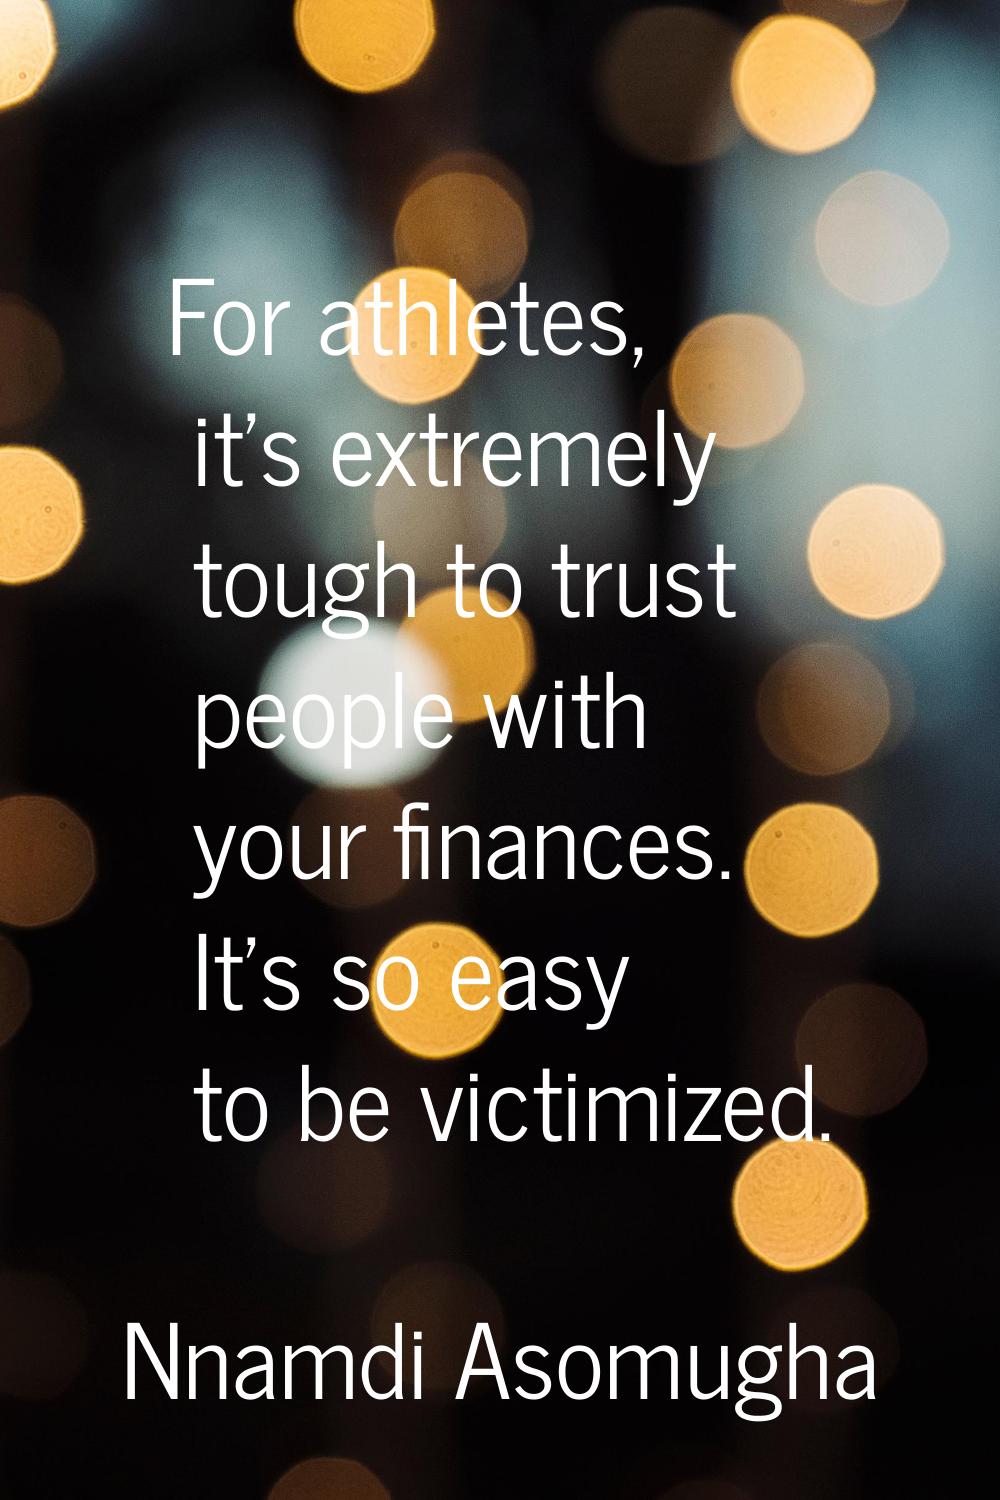 For athletes, it's extremely tough to trust people with your finances. It's so easy to be victimize